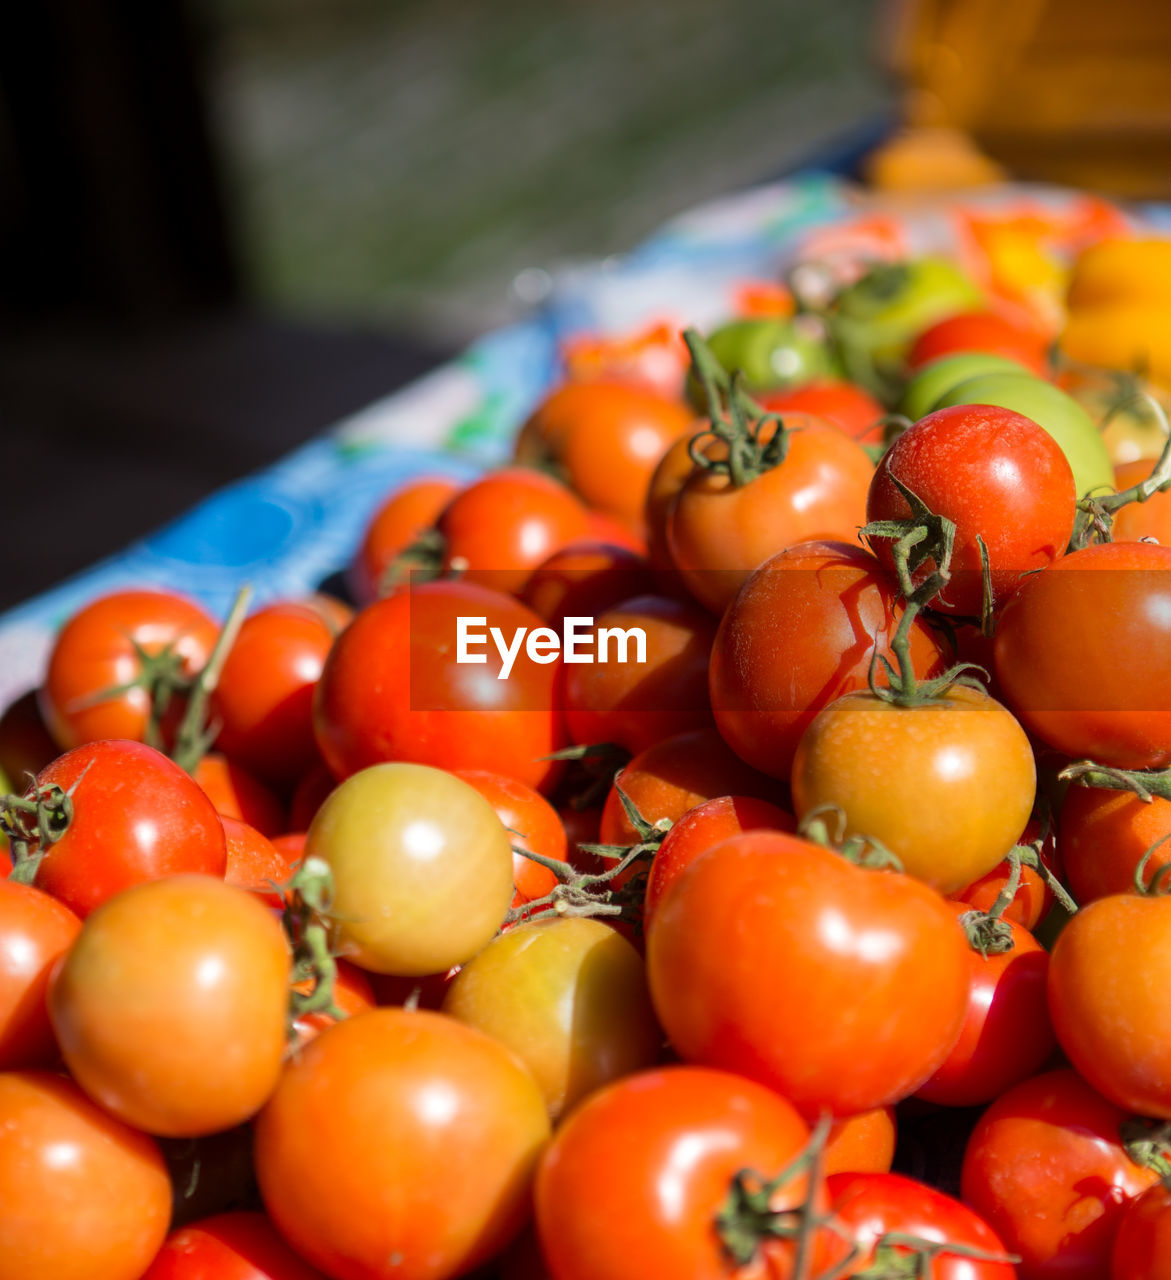 Close-up of tomatoes in market